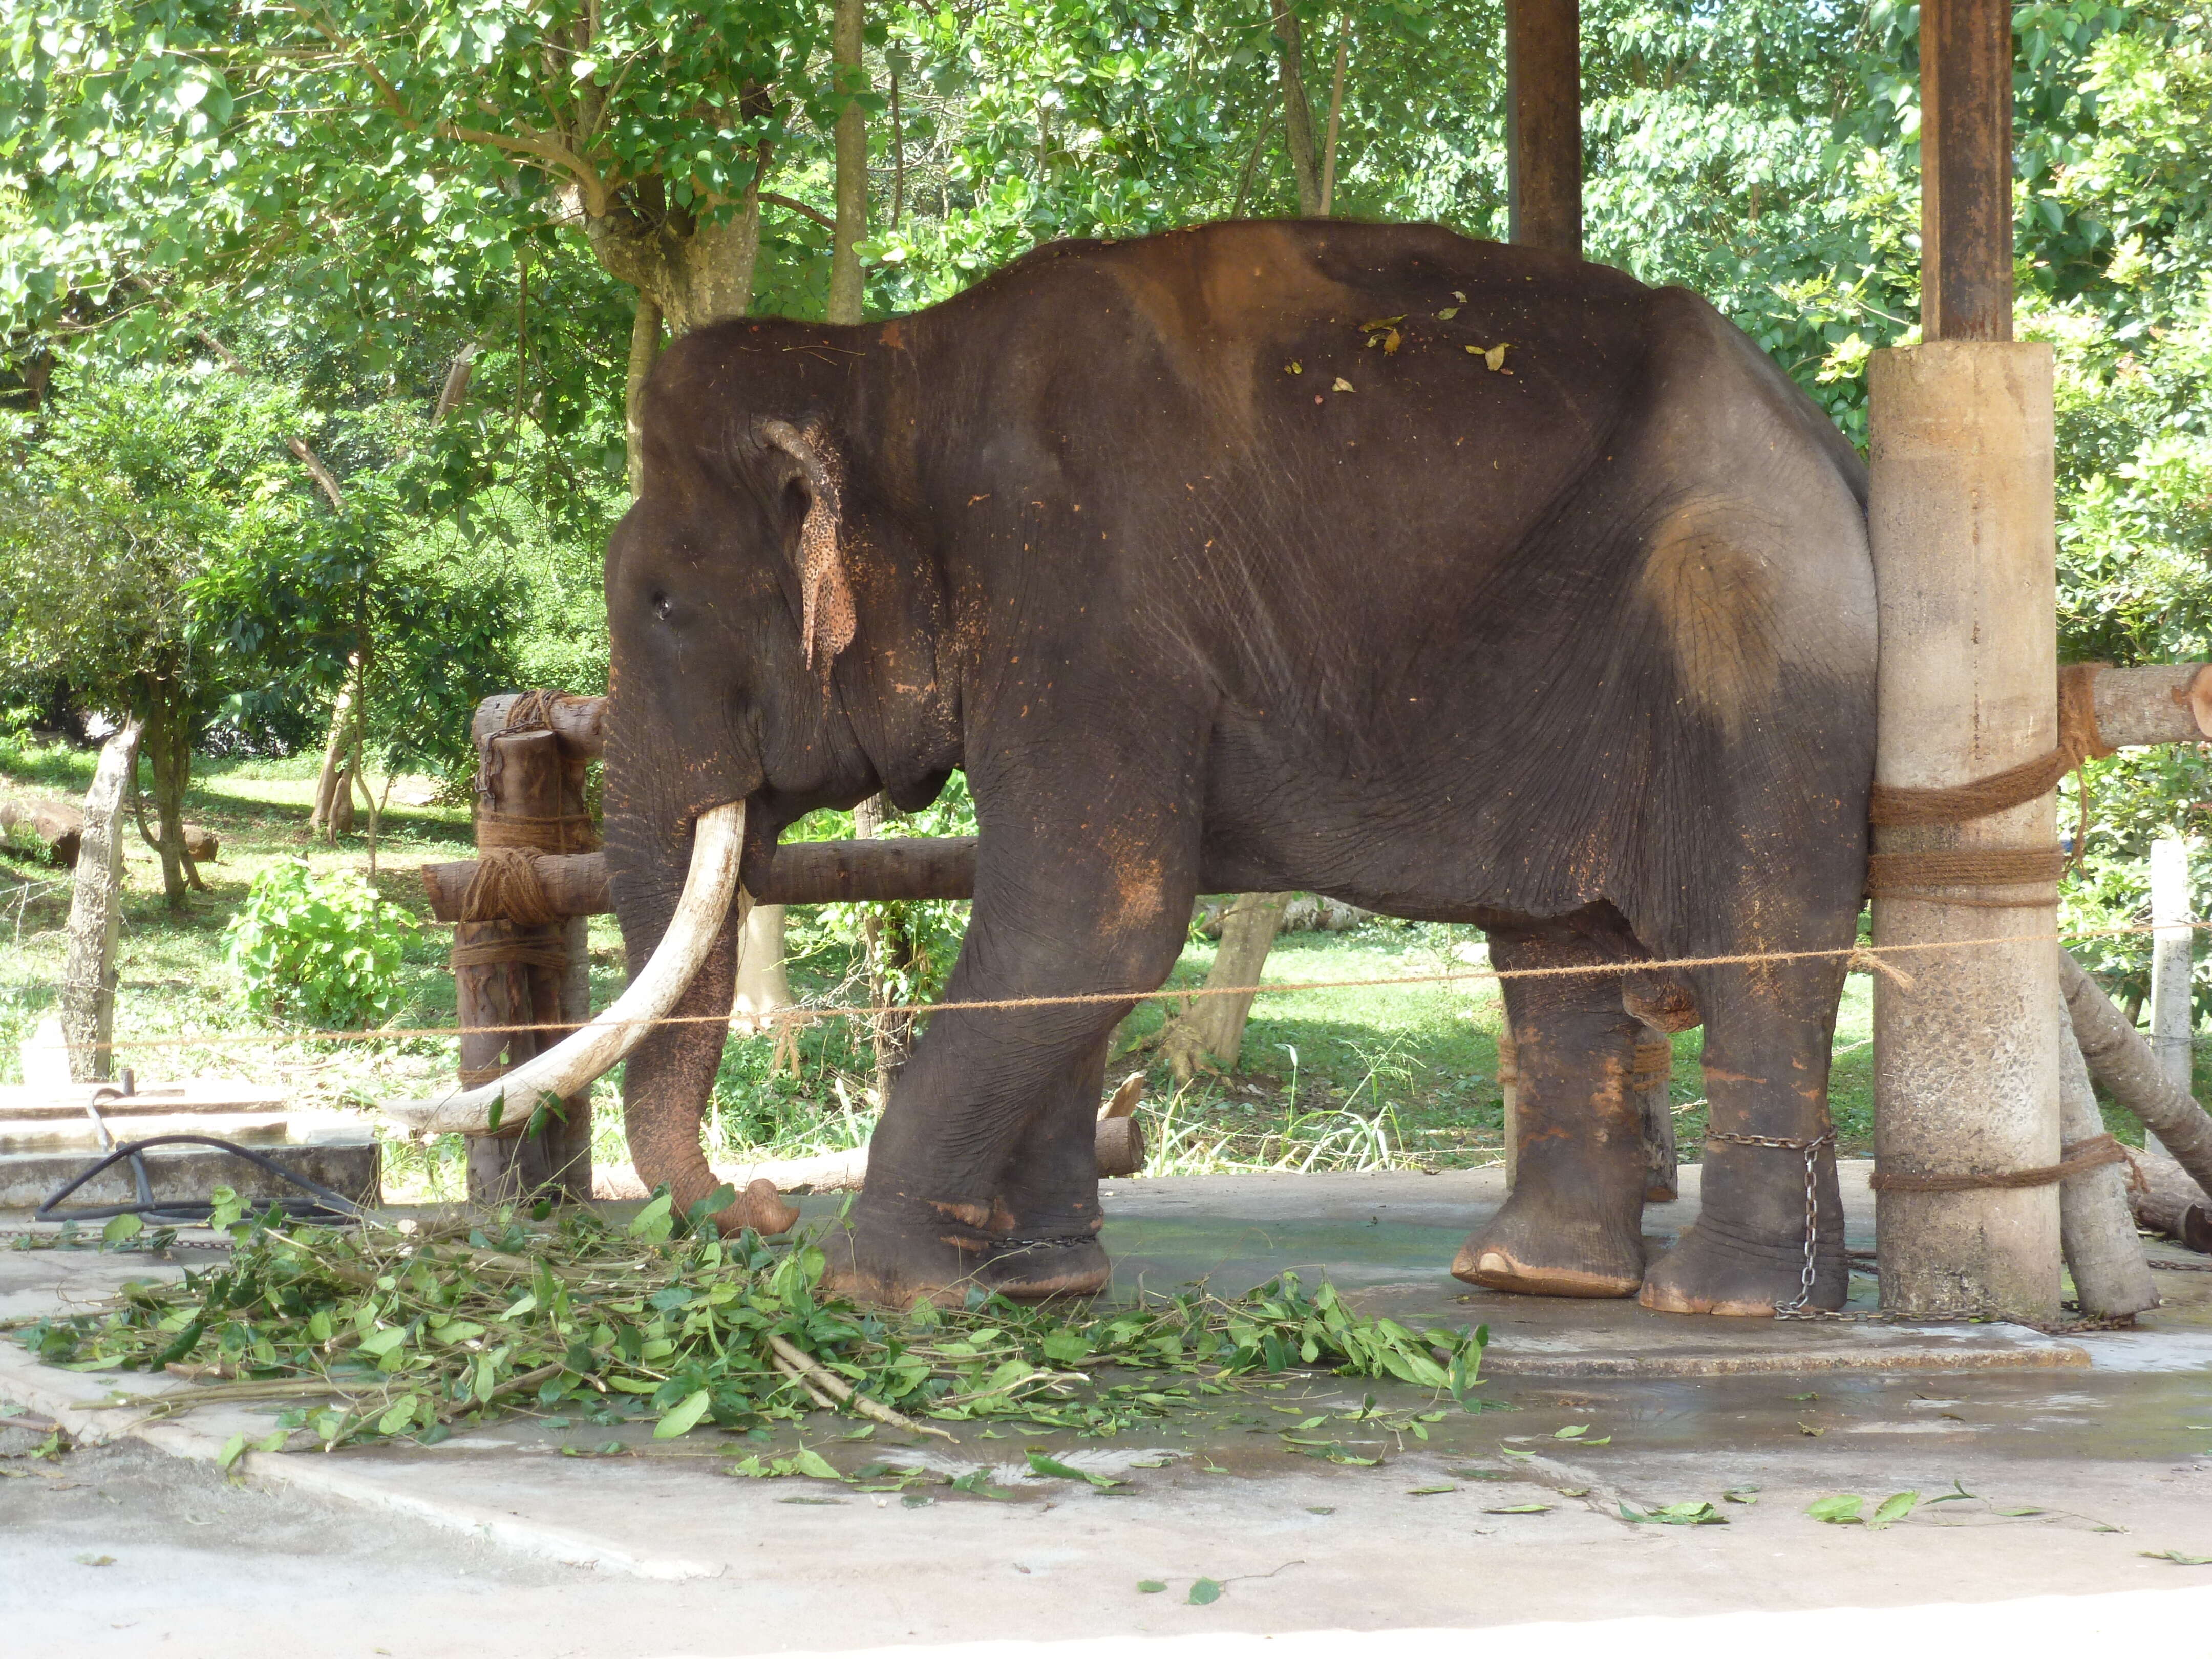 Elephant chained up at fake sanctuary